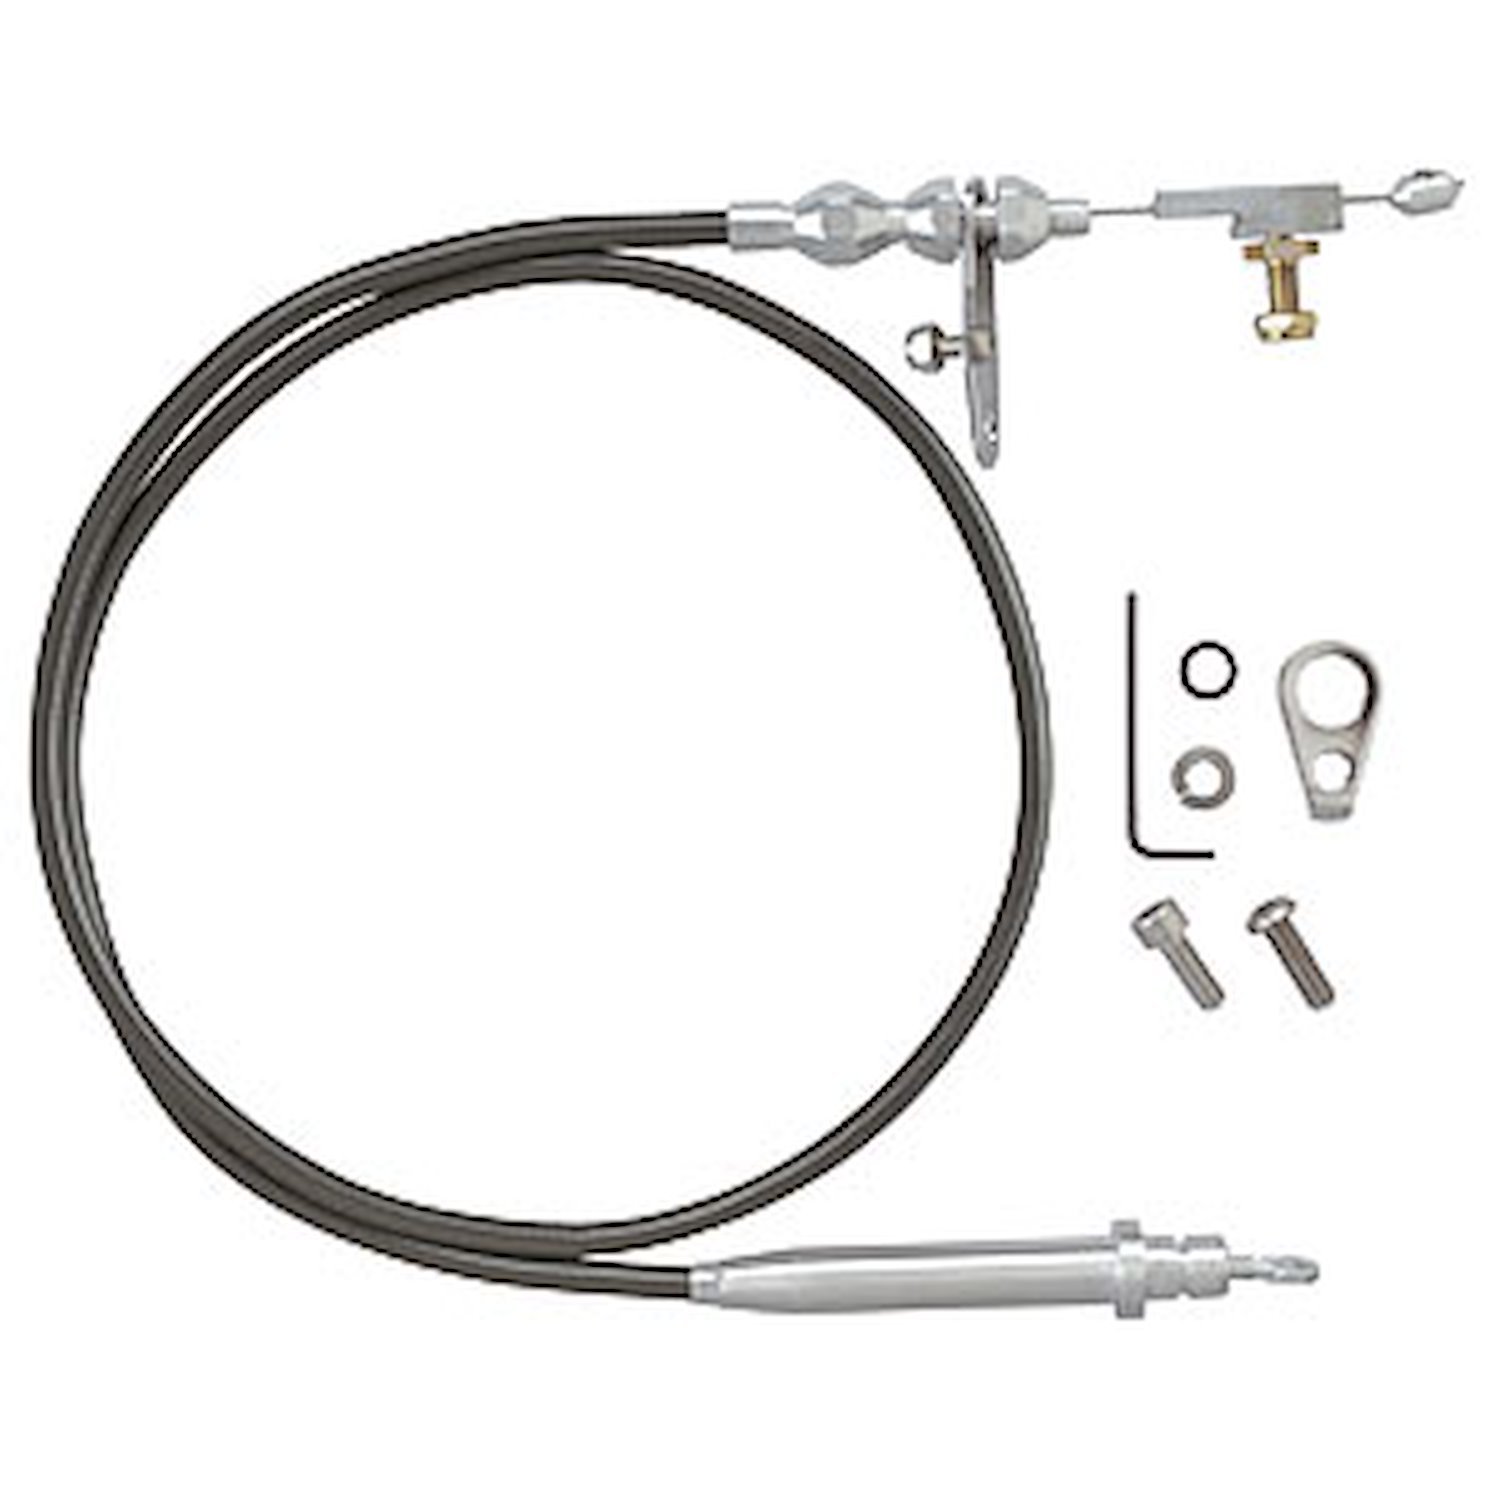 Ford AOD Stainless Steel Kickdown Cable Kit Black